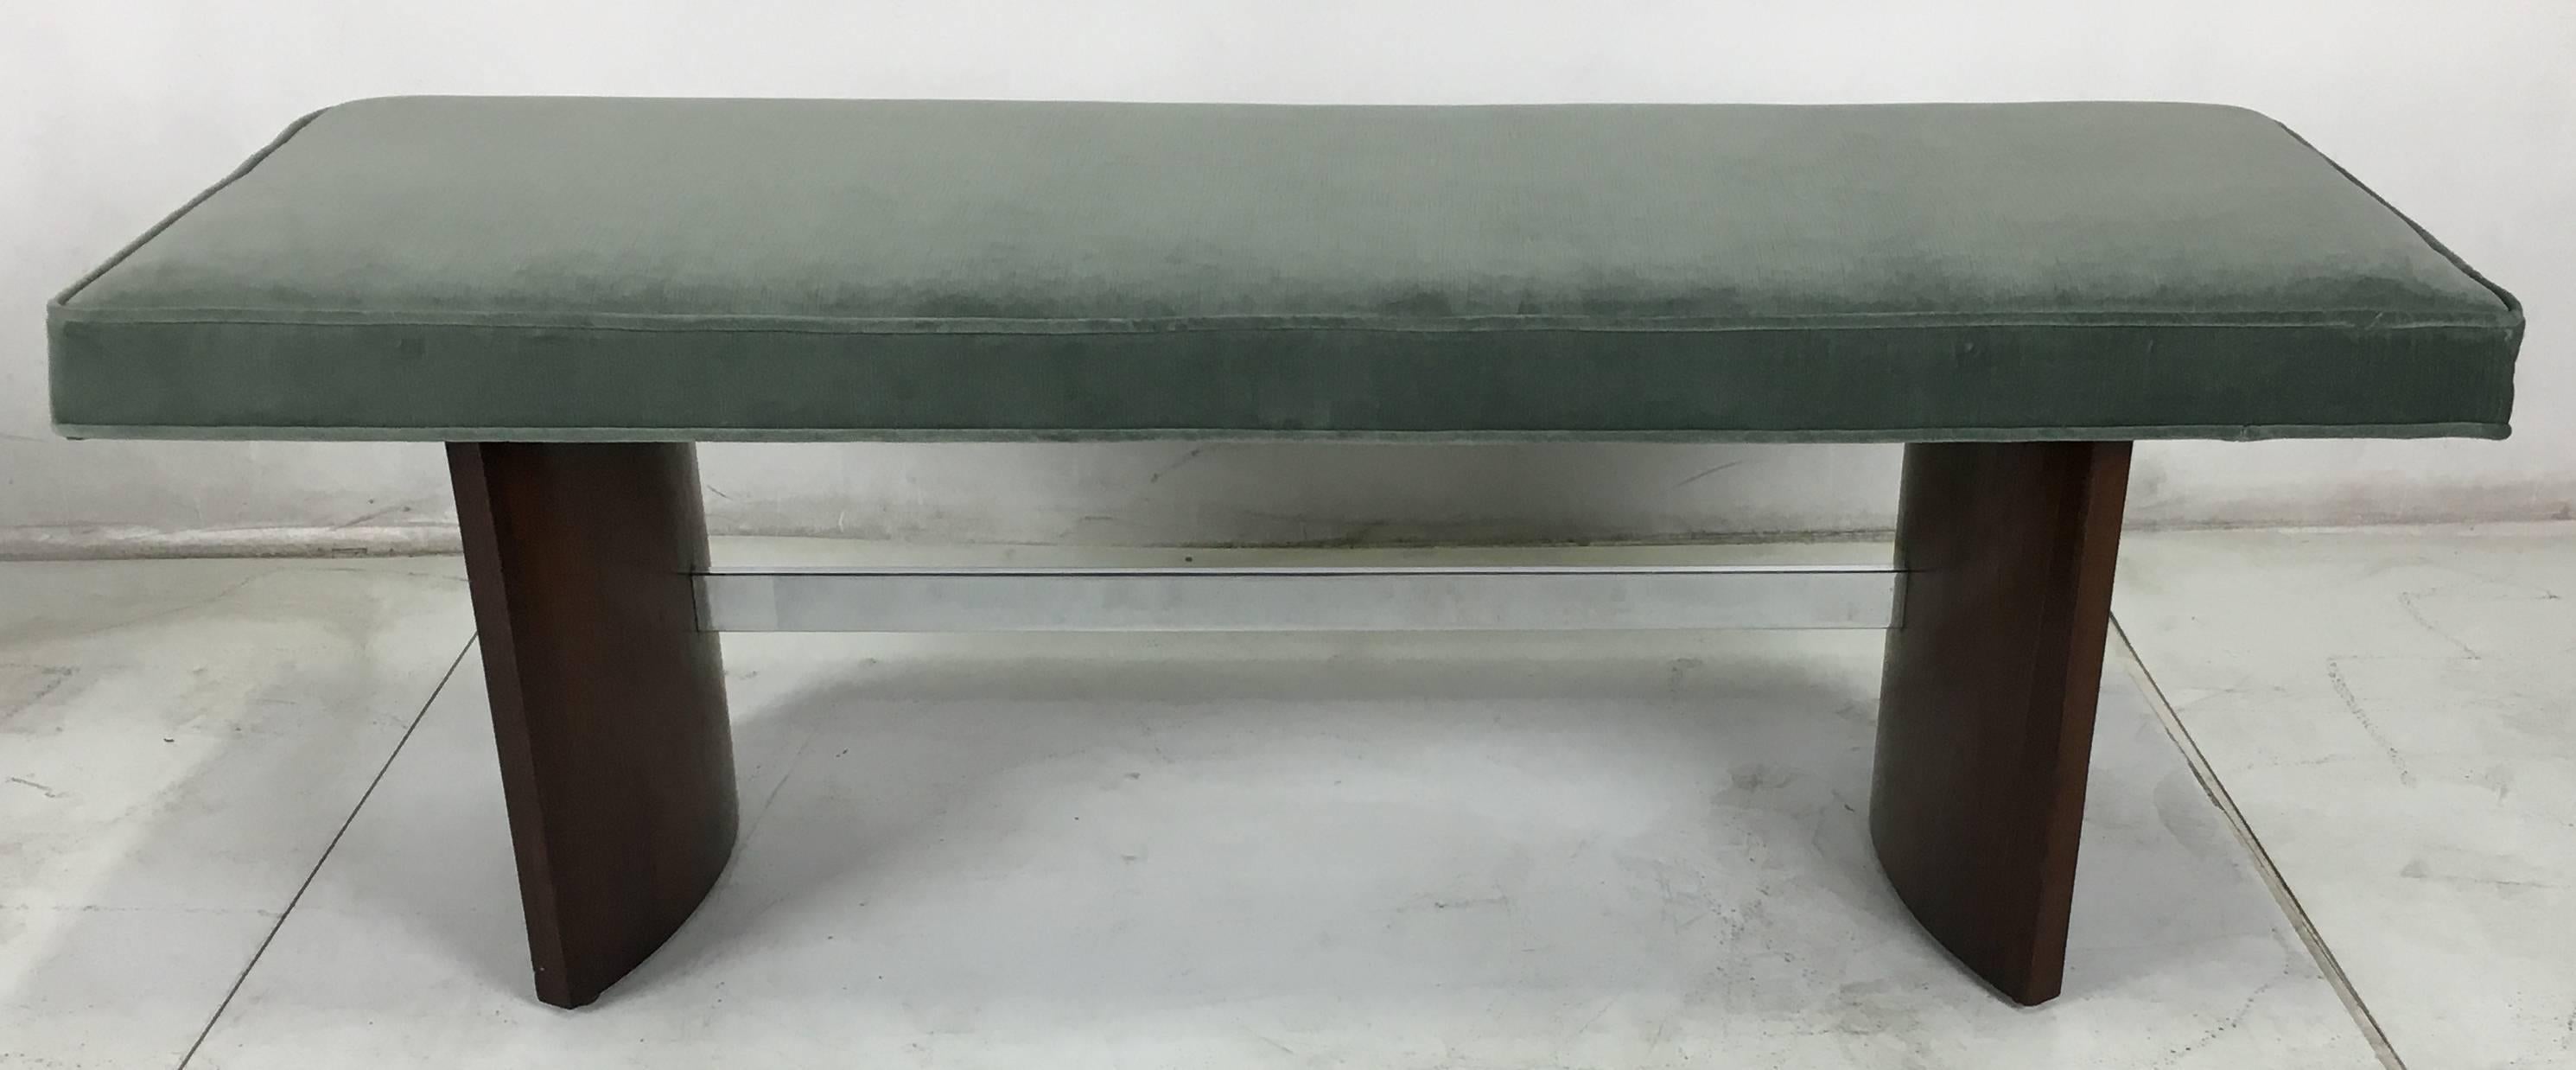 Velvet upholstered seat raised on a pair of Radius supports with a chrome stretcher by Vladimir Kagan.